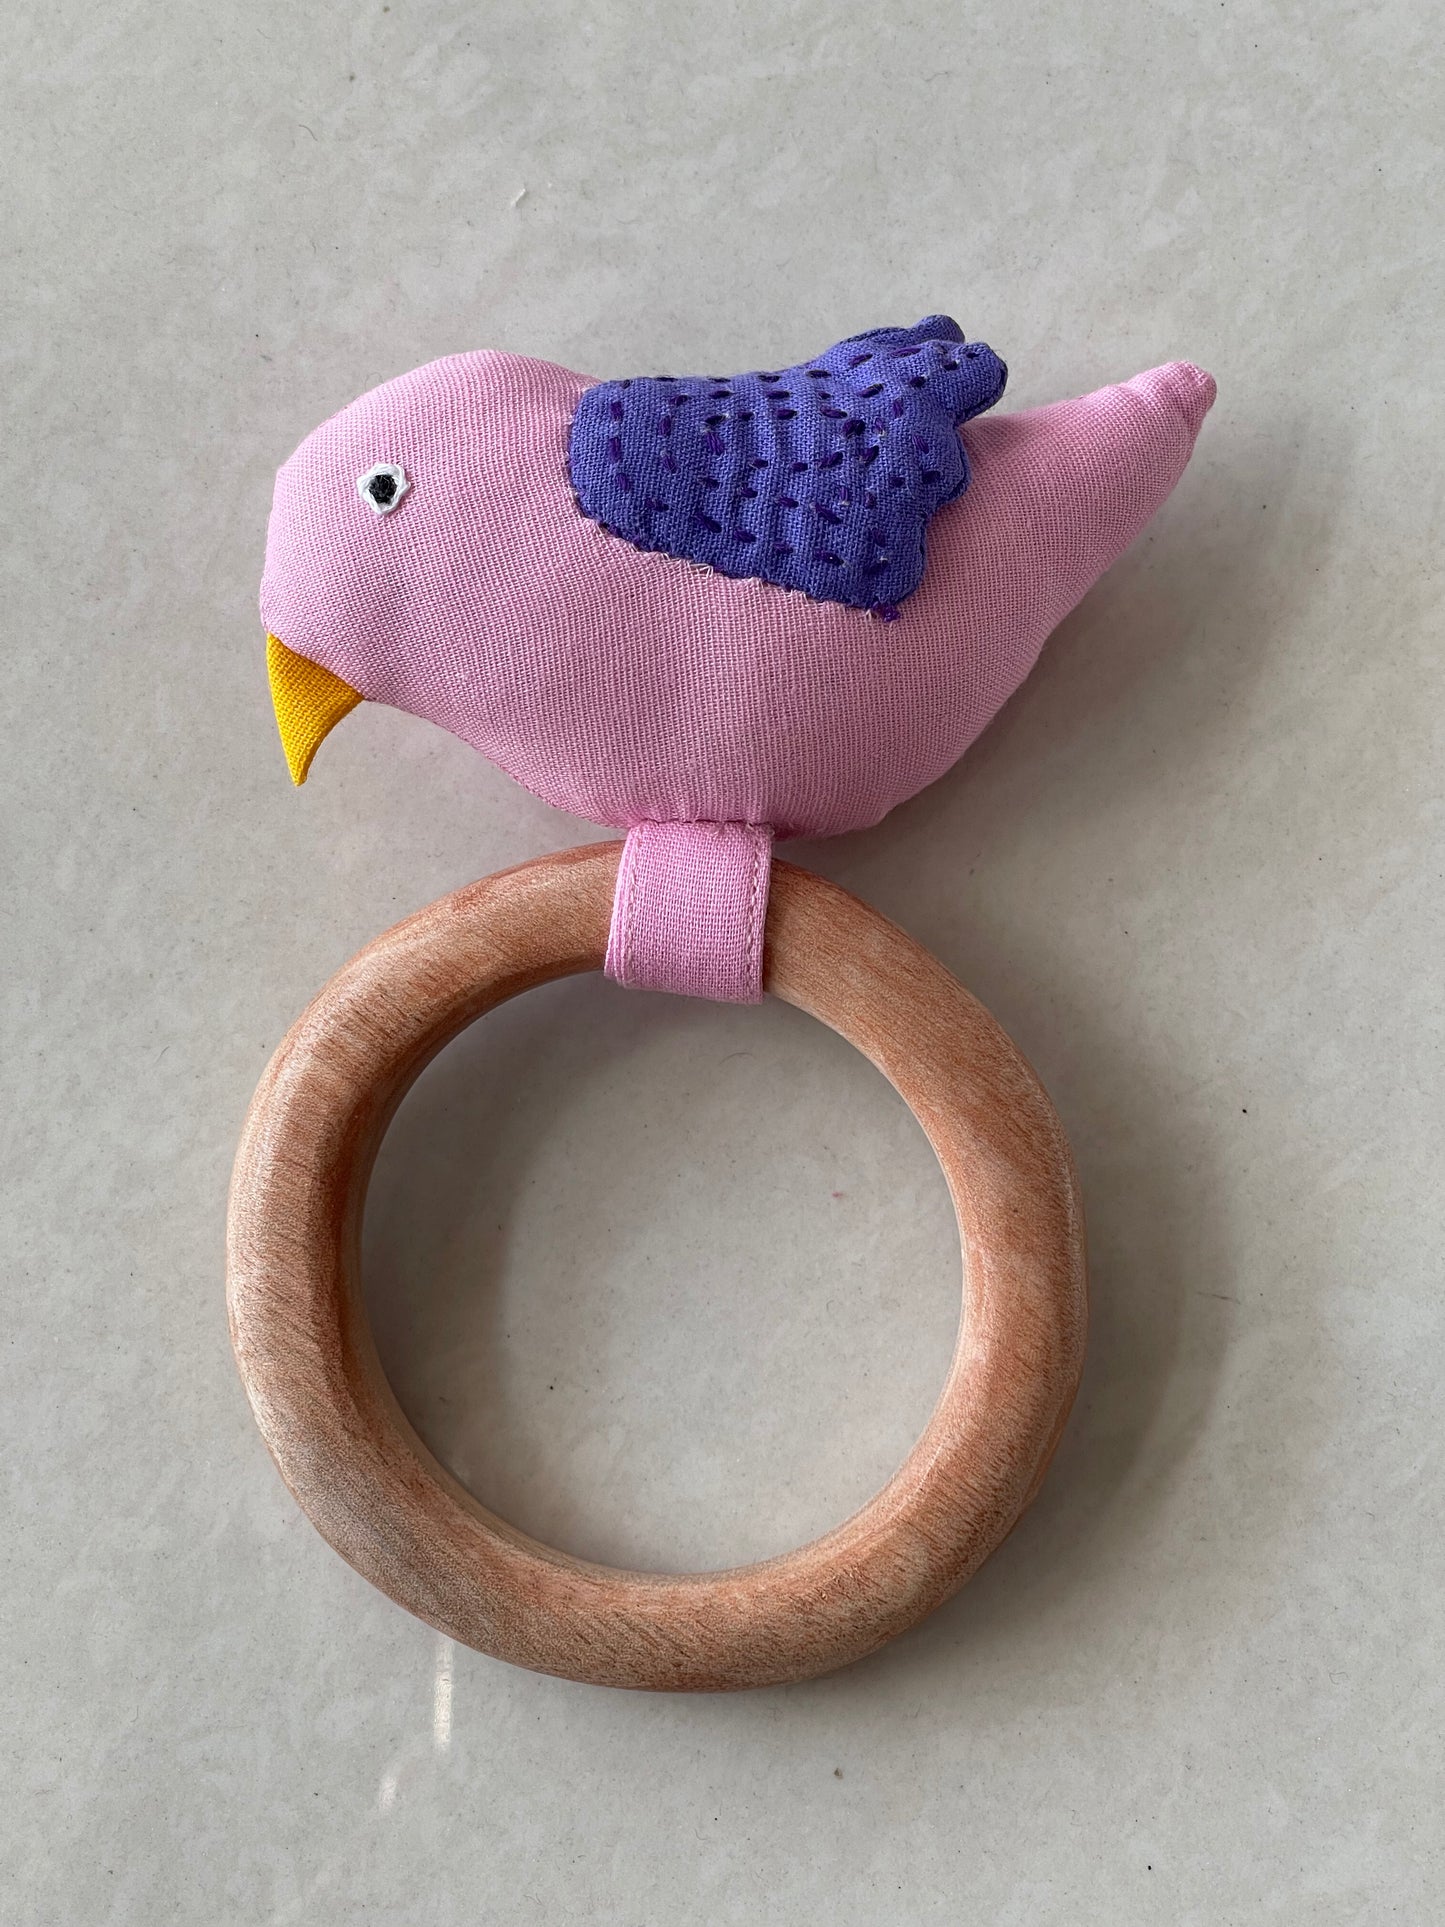 Cute cotton fabric kapok filled bird rattle with wooden ring